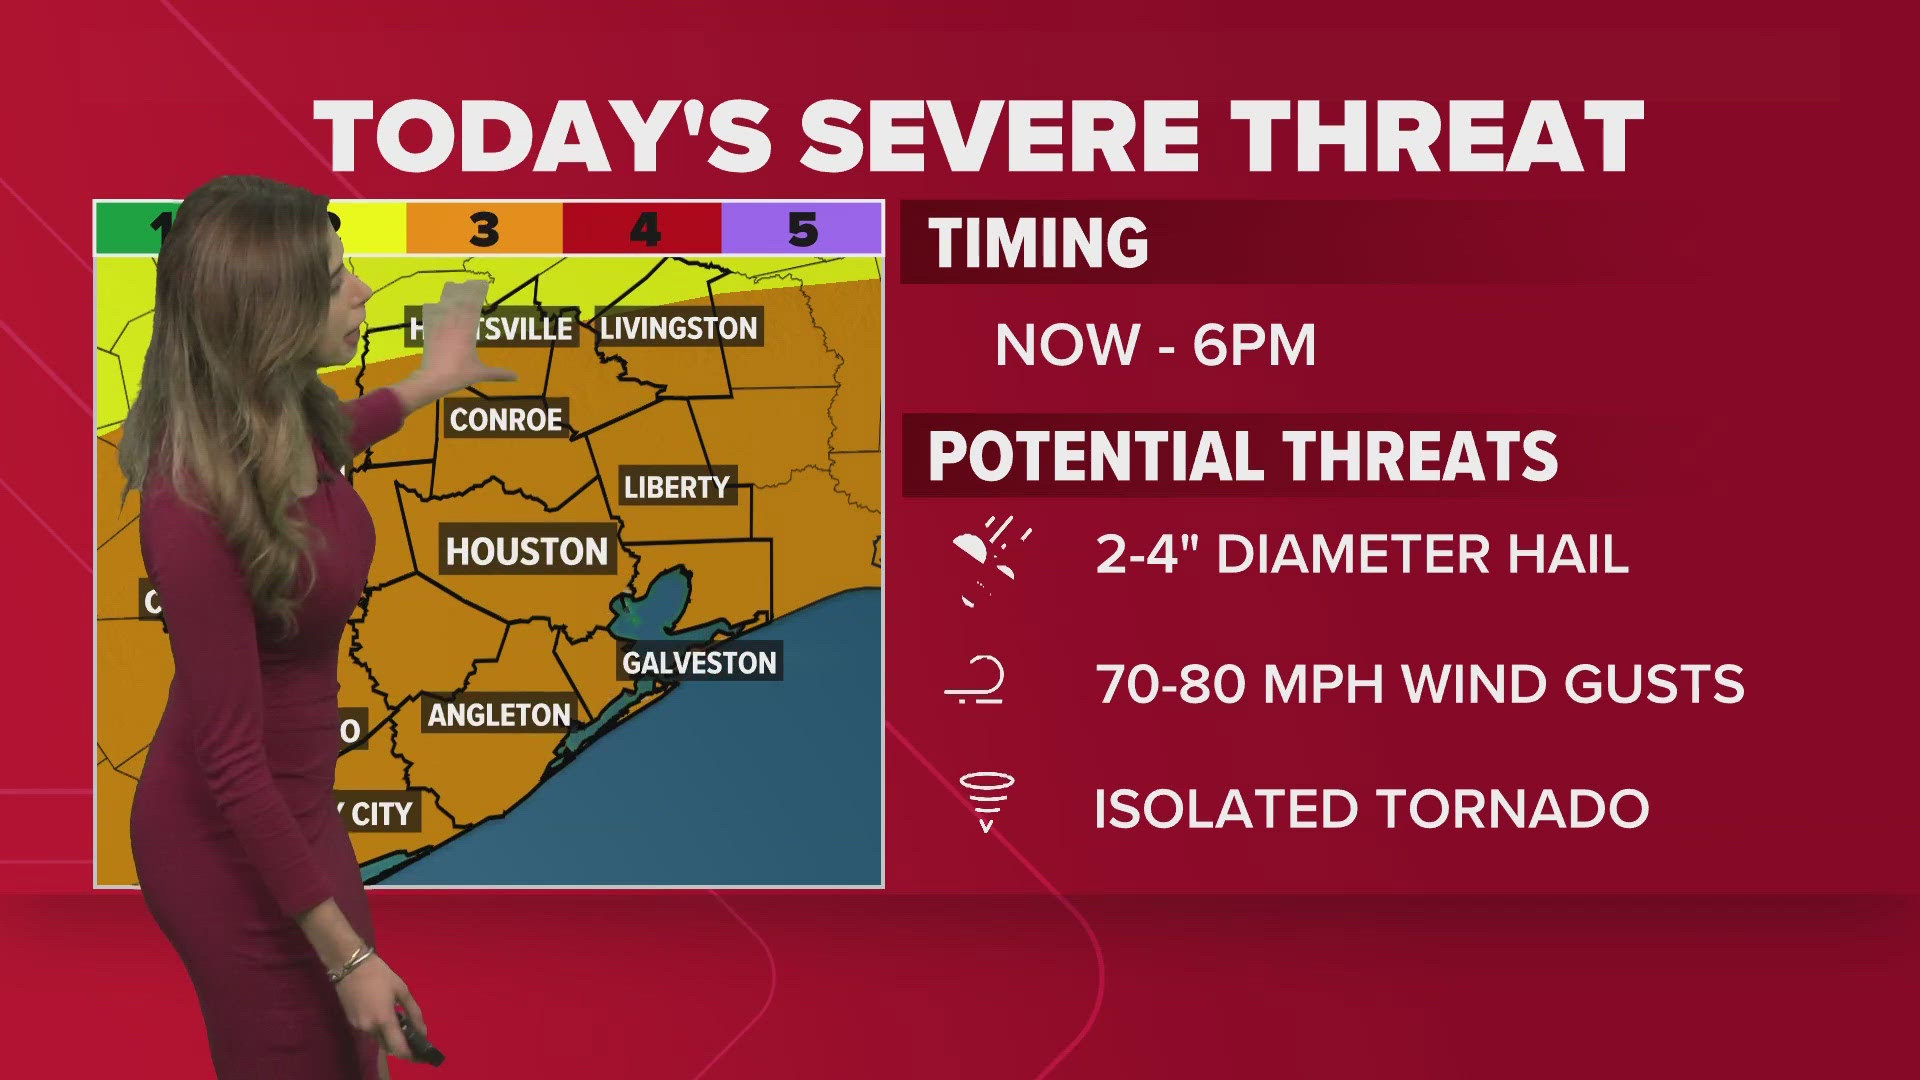 On a scale of 1 to 5, 5 being the worst, the severe threat for Southeast Texas is a level 3 for Monday, including much of Harris County.